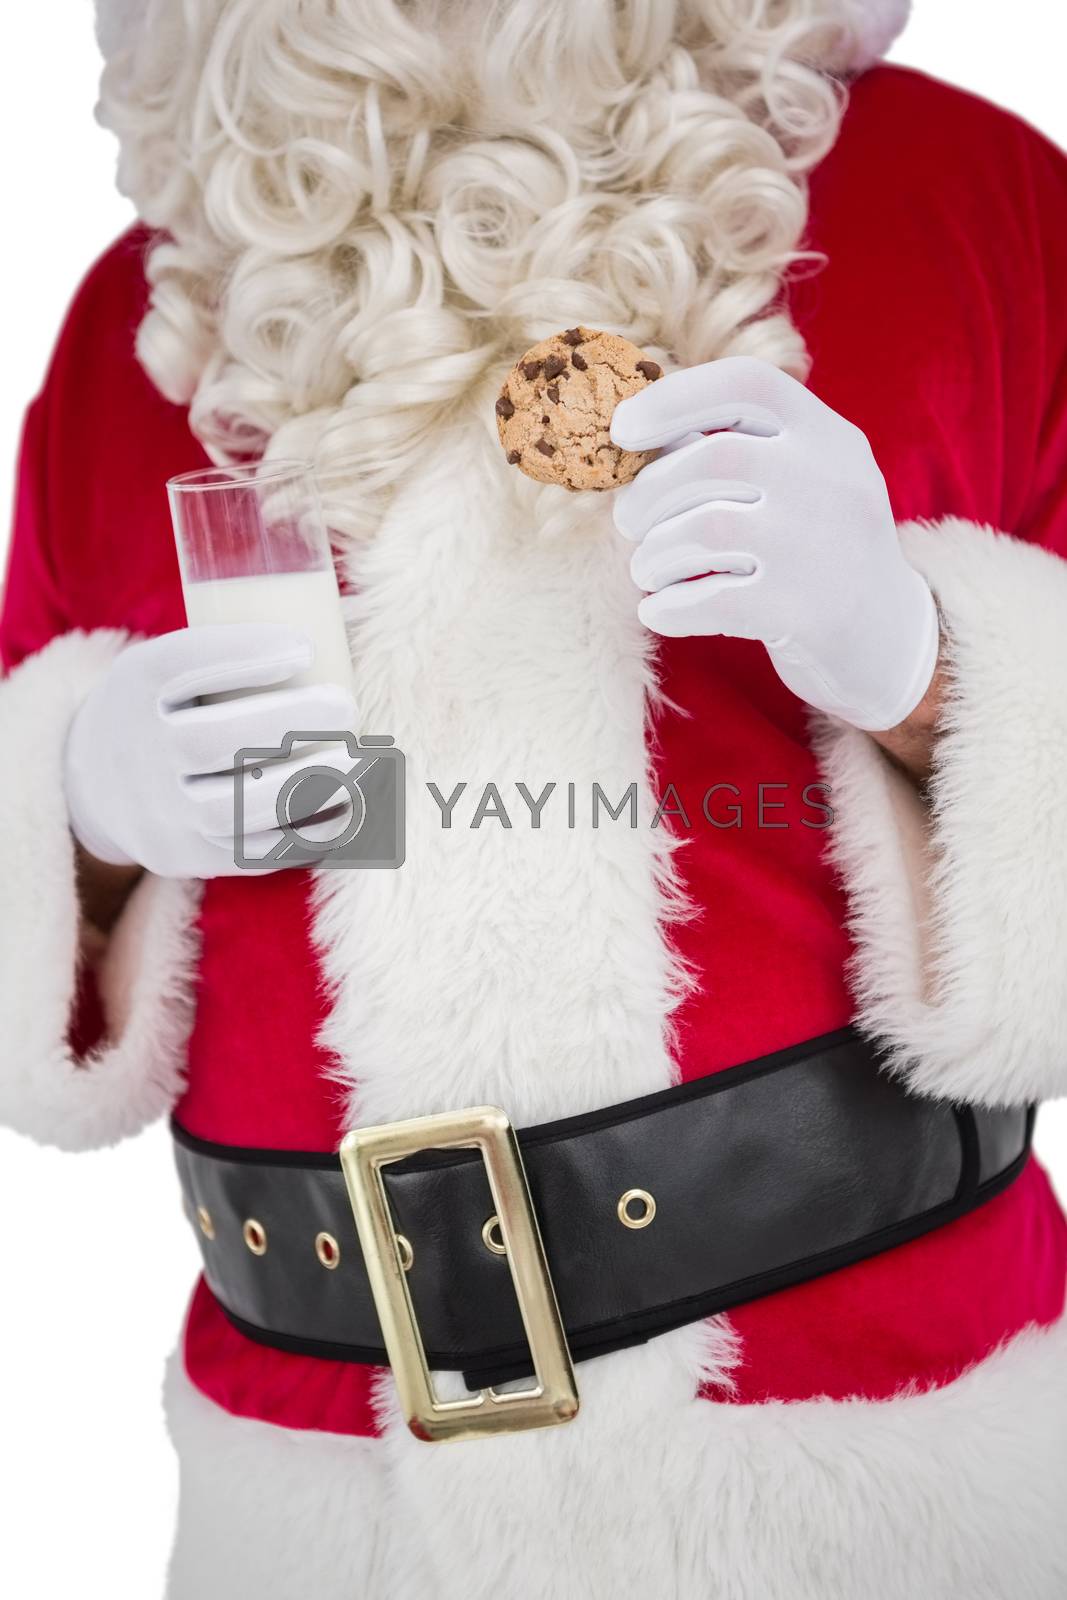 Royalty free image of Santa holding glass of milk and cookie by Wavebreakmedia